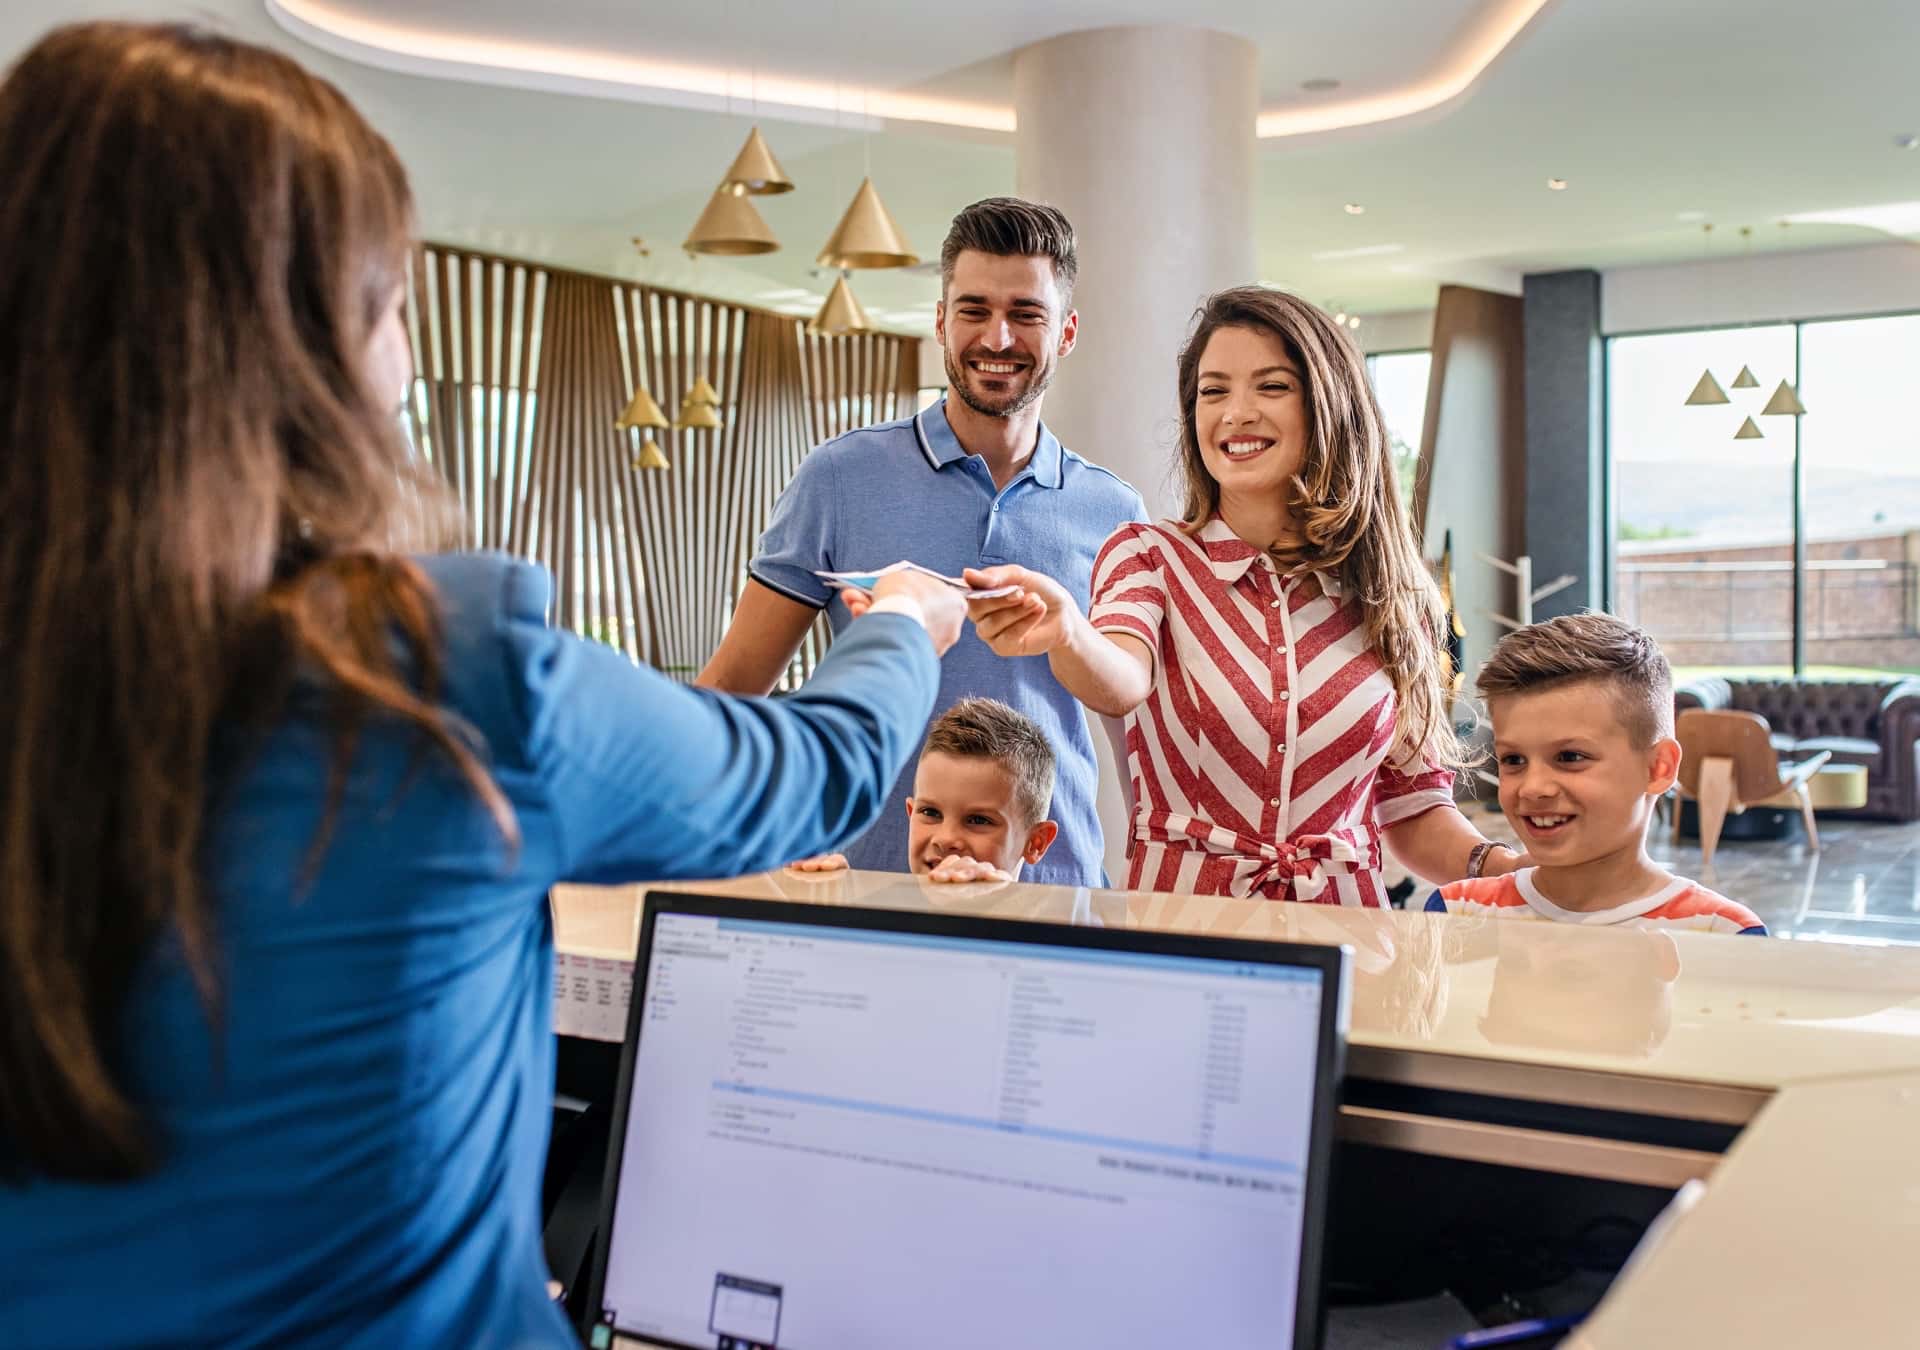 A family checking in to a hotel, representing the retail and hospitality industry, where Fast Fixx offers IT solutions to streamline operations, enhance customer experience, and drive growth.